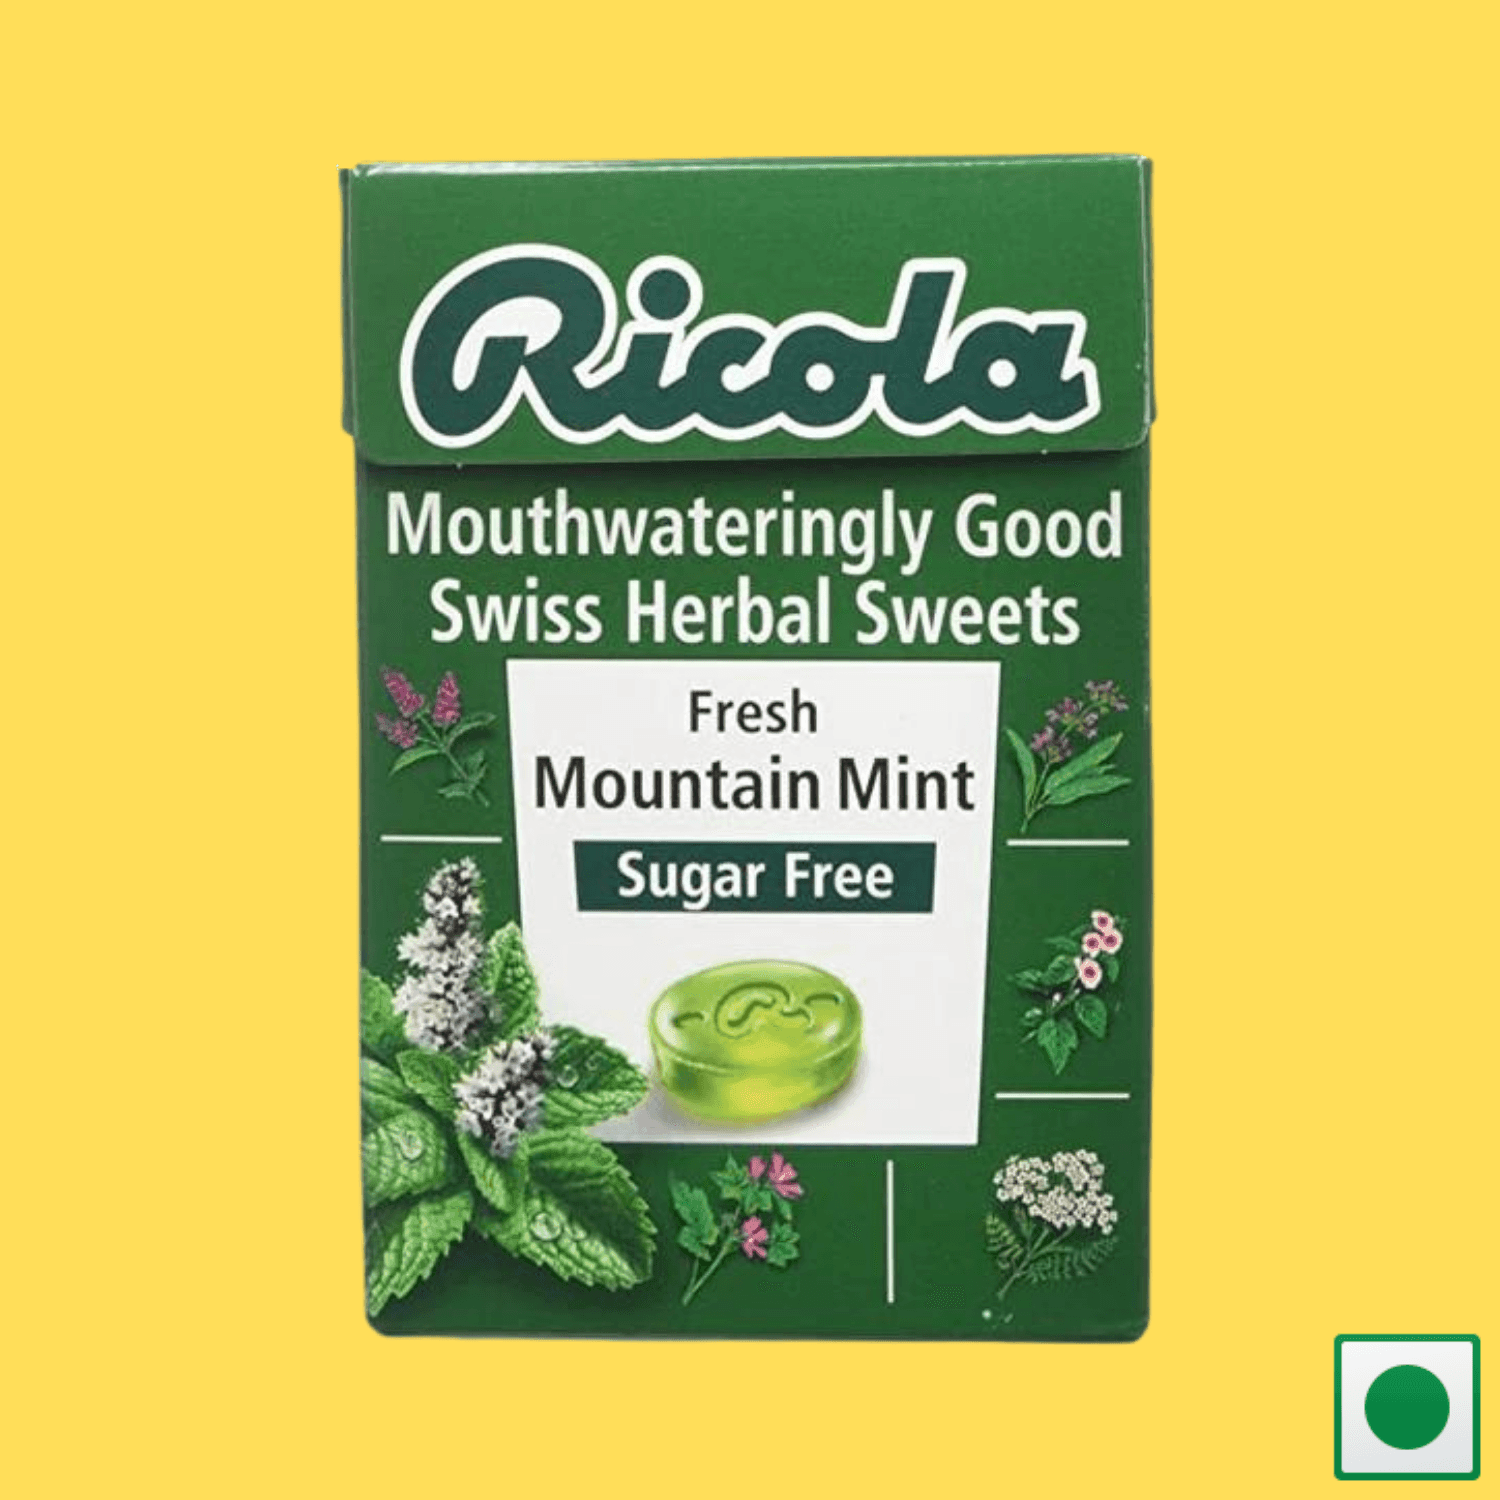 Ricola Sugar Free Mountain Mint Swiss Herbal Sweets, 45g (Imported) - Super 7 Mart